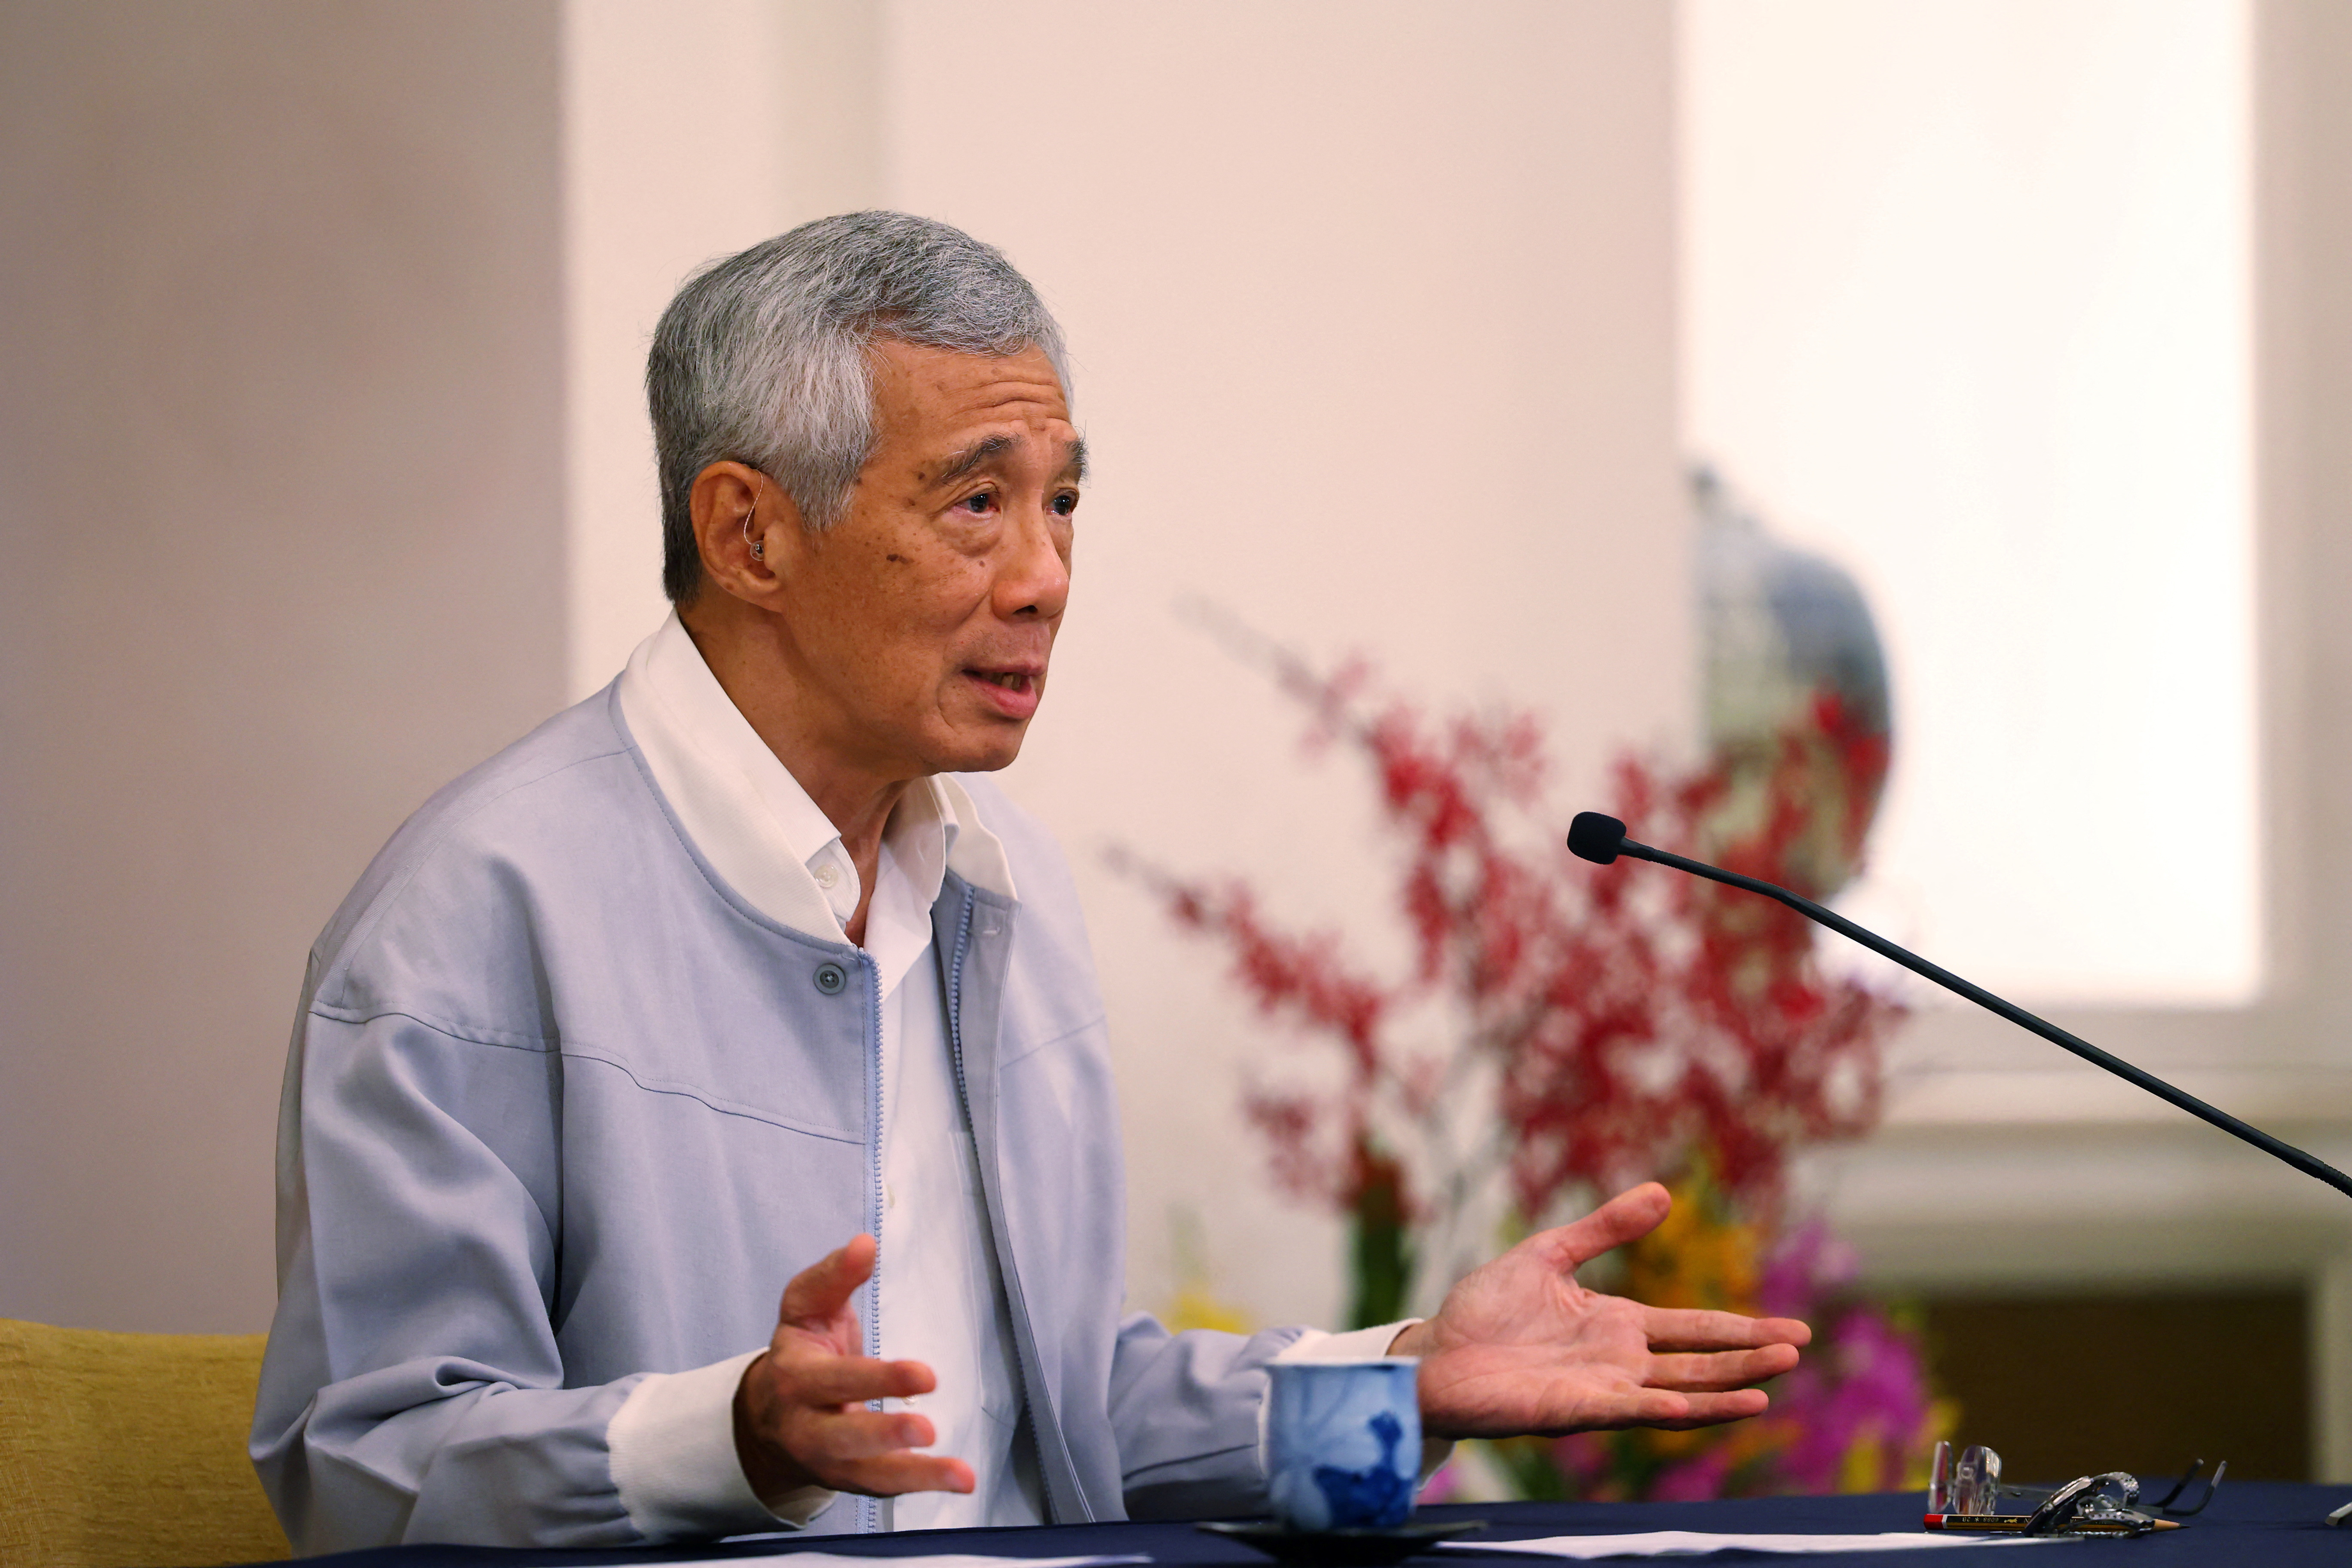 Singapore's Prime Minister Lee Hsien Loong speaks during a press conference after the resignation of two senior lawmakers, at the Istana